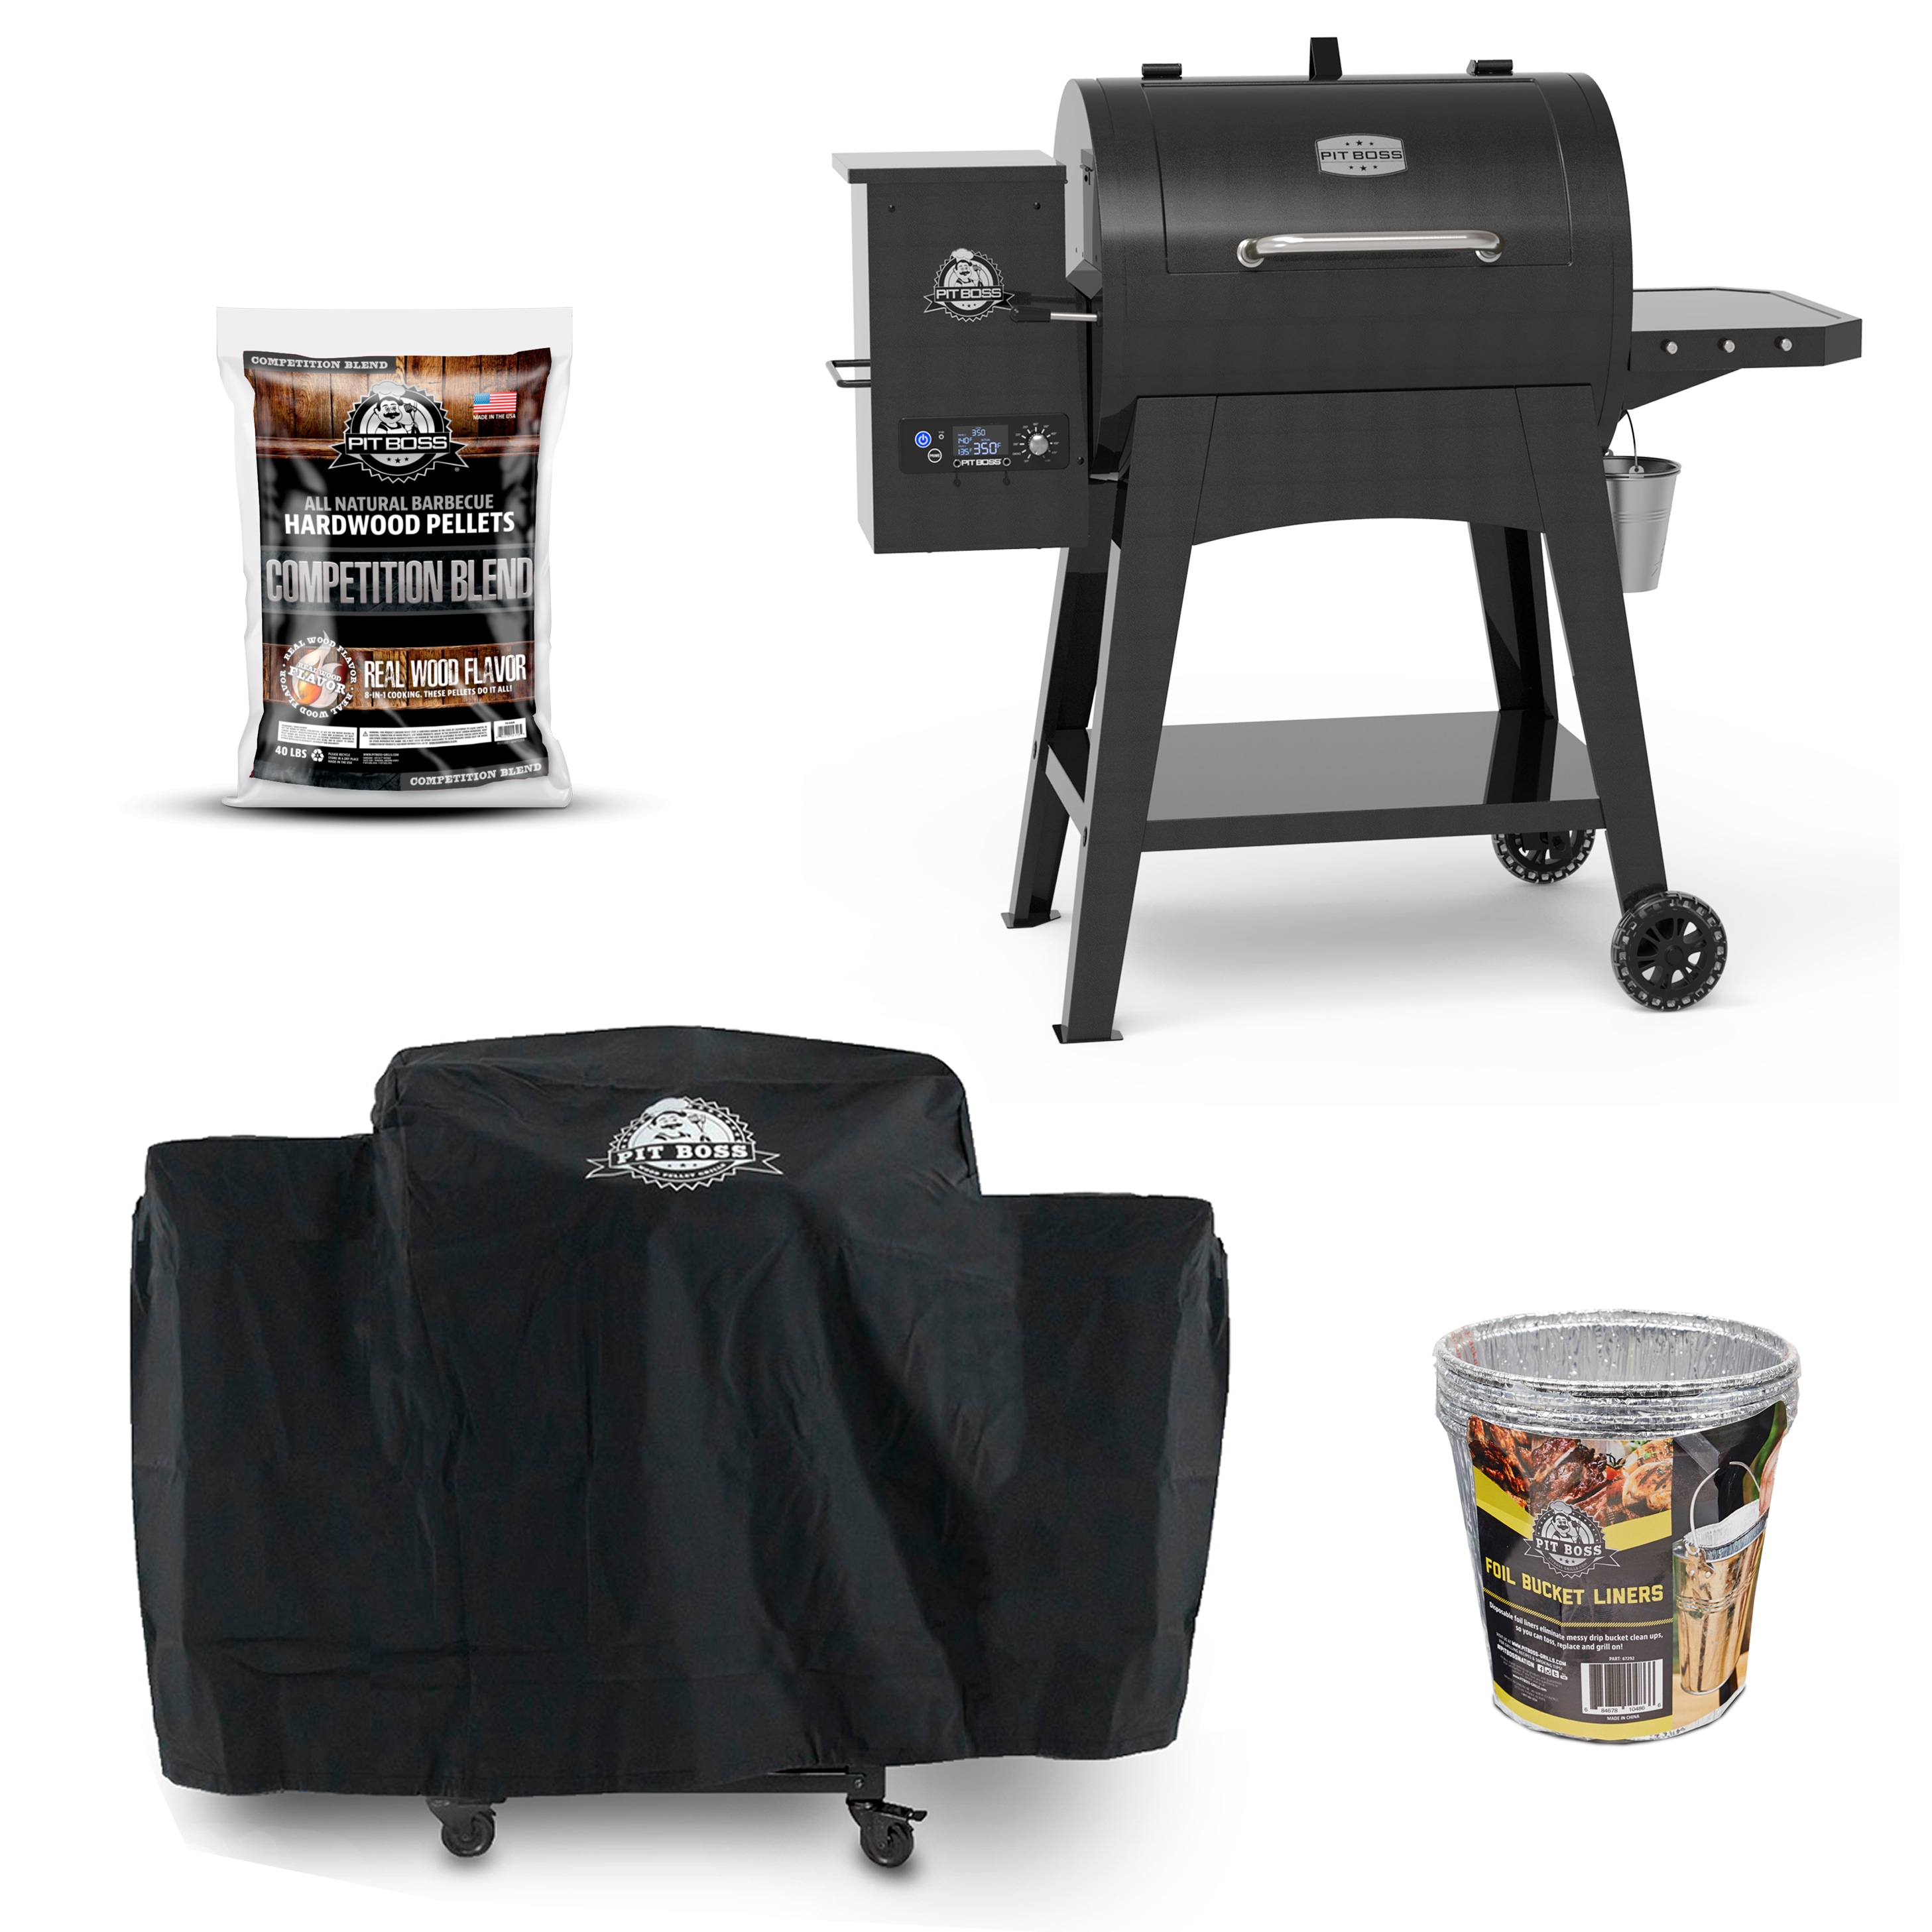 Pit Boss Grill Cleaning Starter Kit